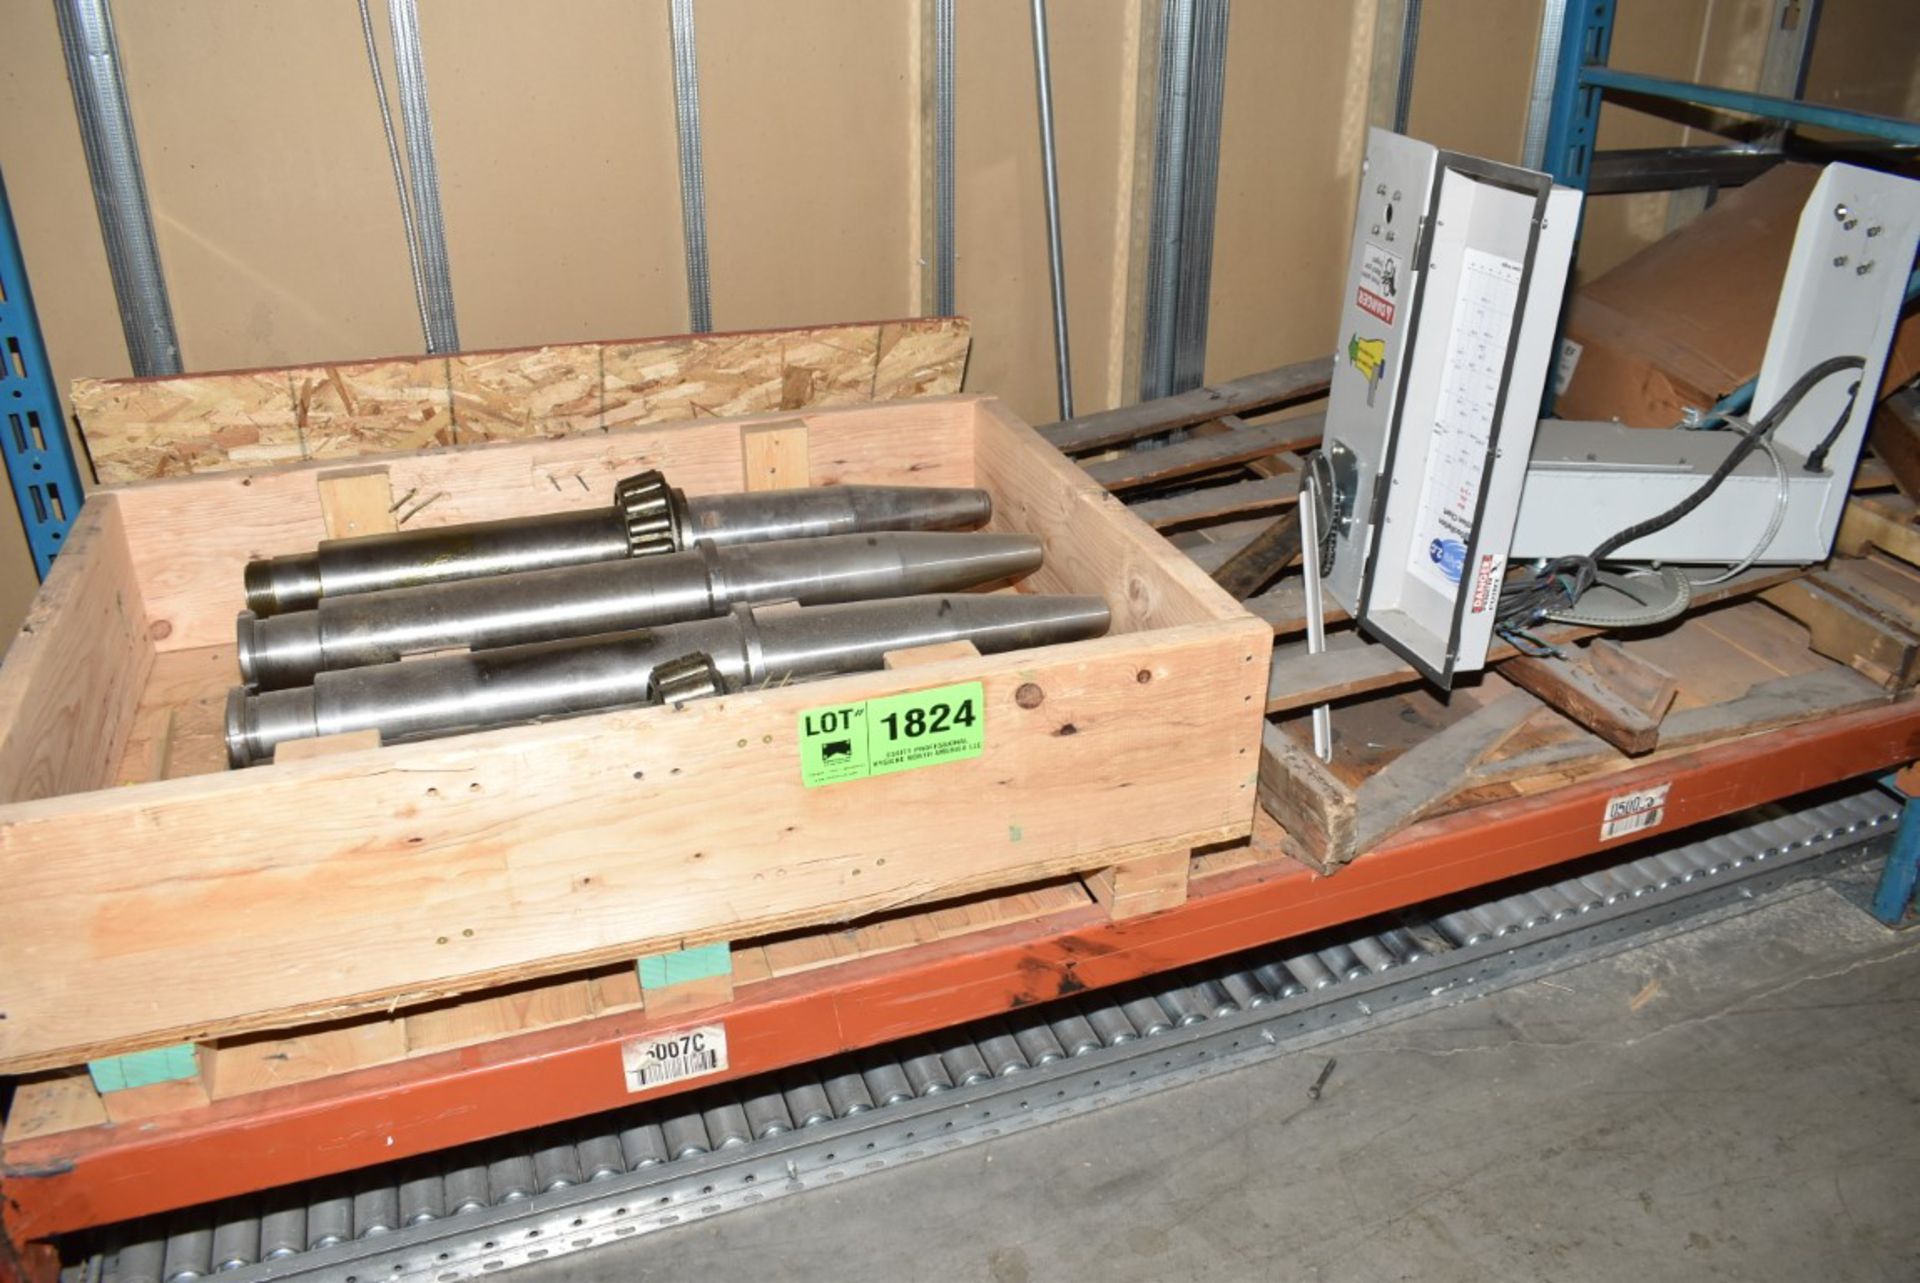 LOT/ CONTENTS OF SHELF - INCLUDING HEAVY DUTY CHUCK SHAFTS, SURPLUS EQUIPMENT [RIGGING FEE FOR